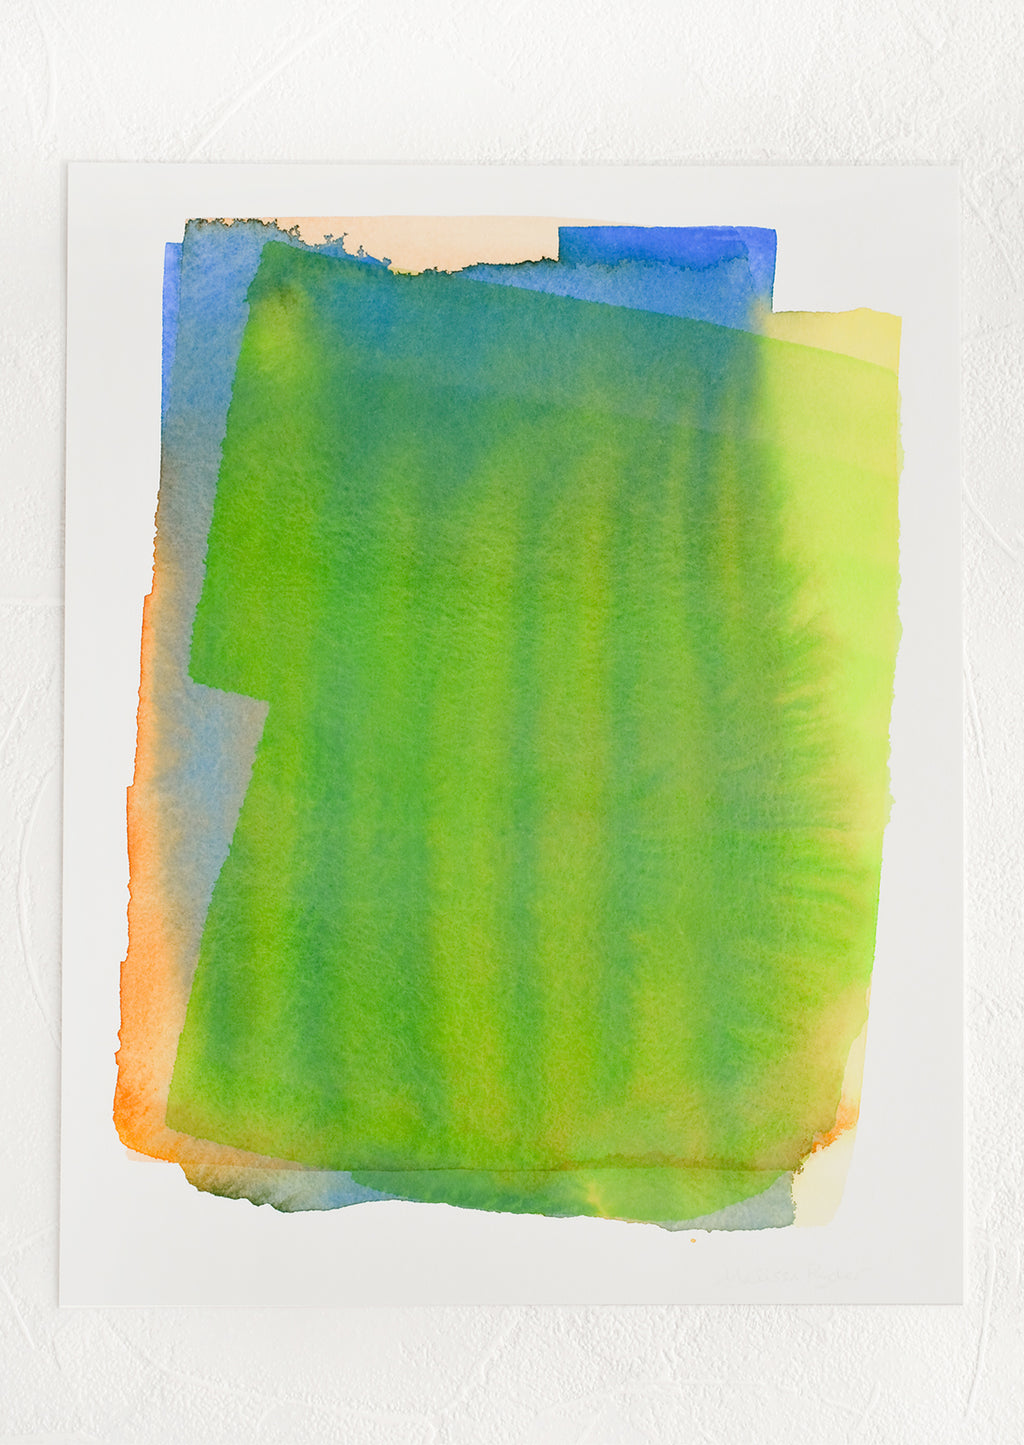 1: Art print of a watercolor abstract form in green, yellow, blue and orange.